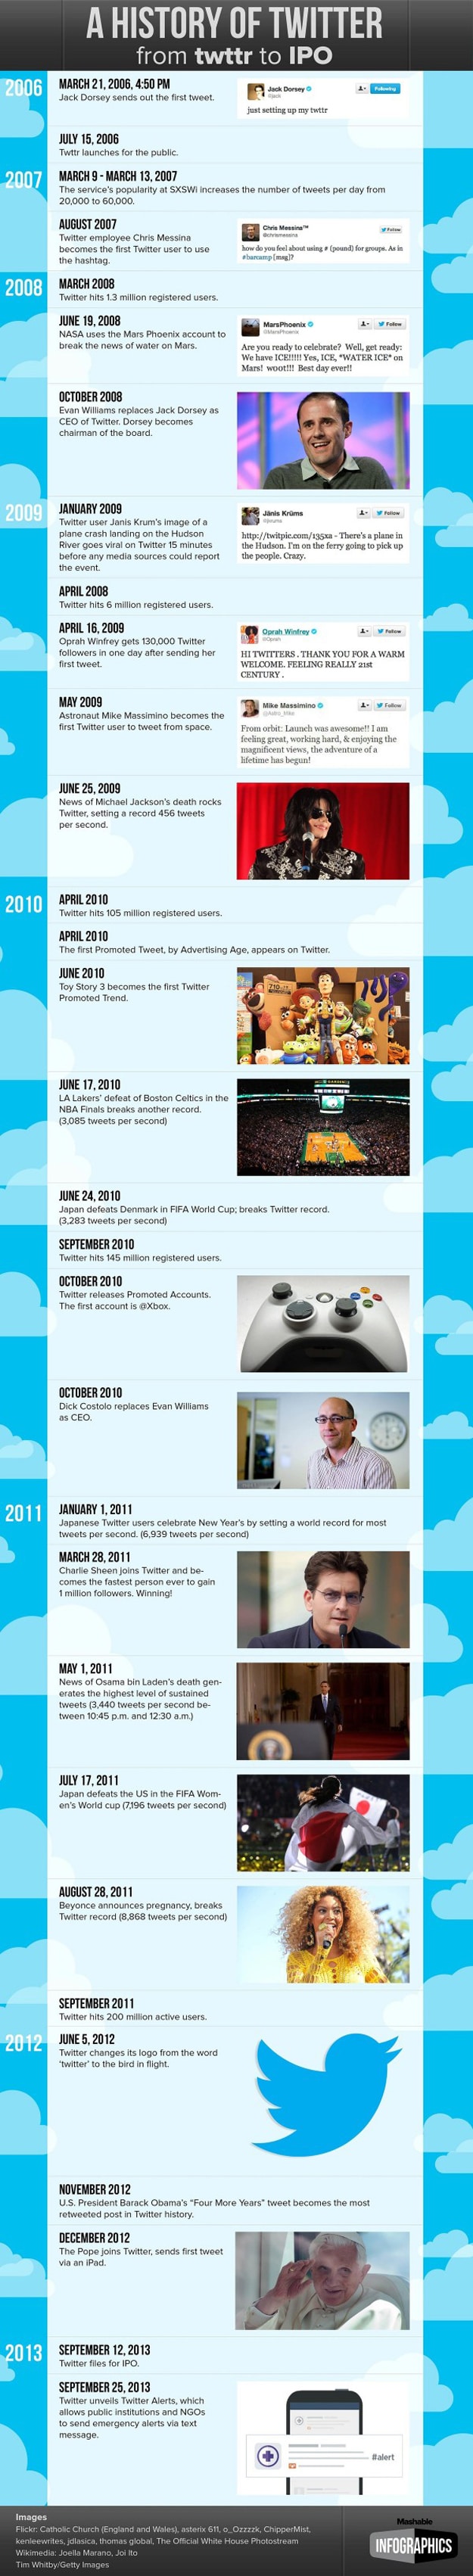 History Of Twitter From Twttr To IPO Is Full Of Memories [Infographic]